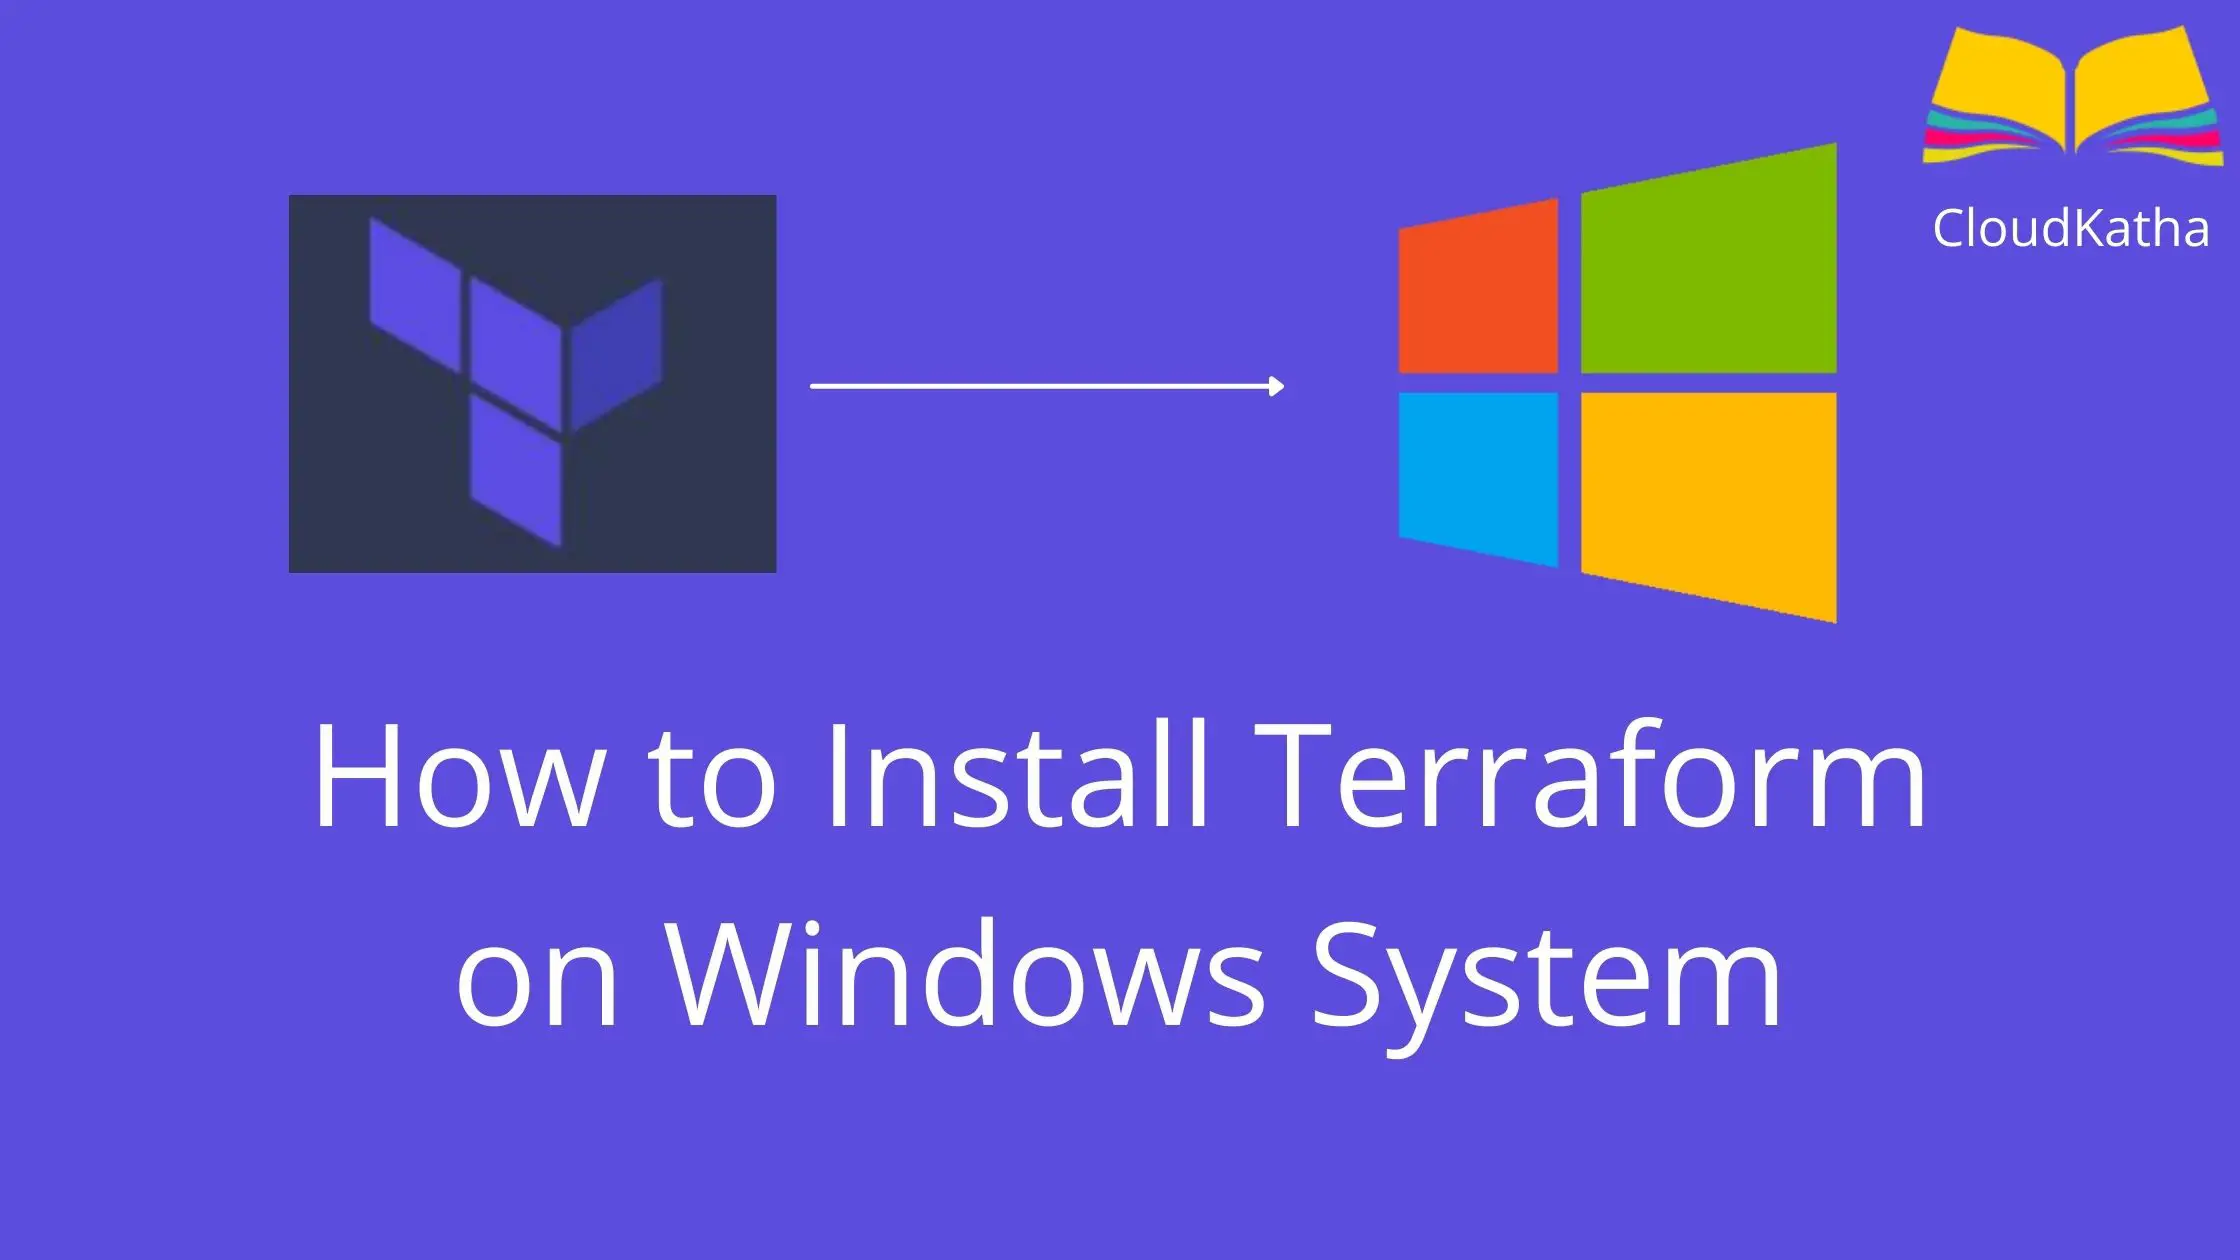 How to Install Terraform on Windows System